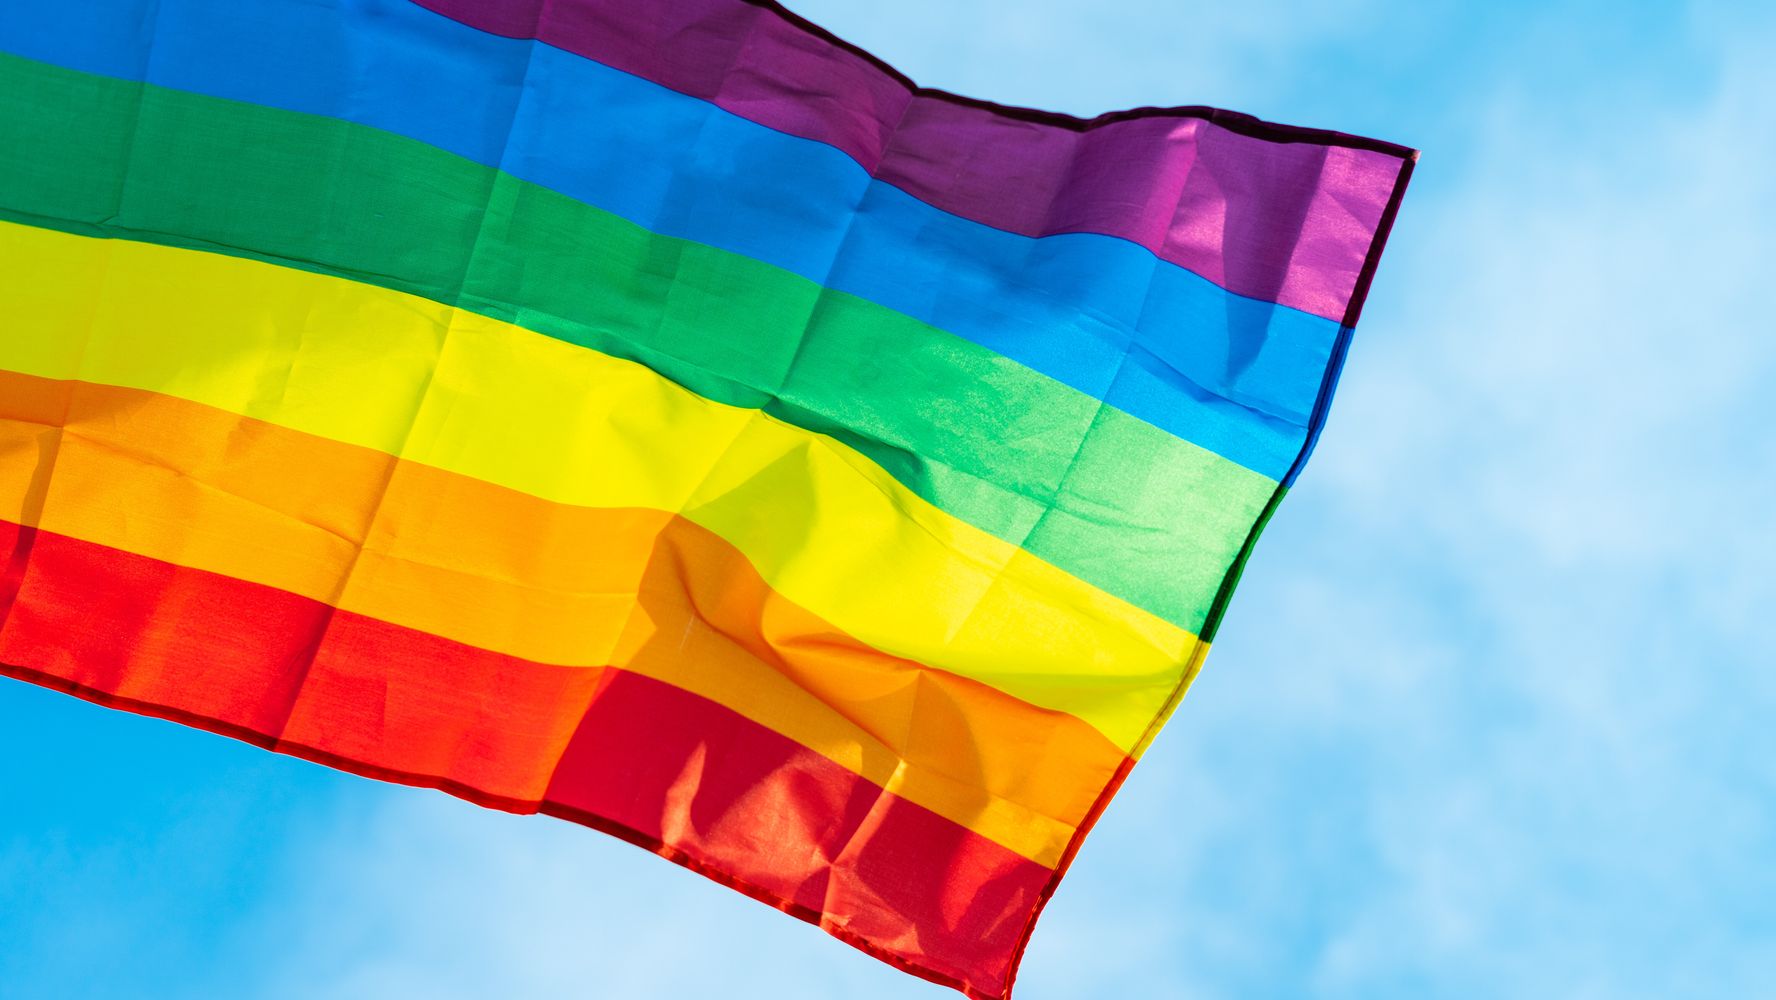 Florida High School Student Suspended After Handing Out Pride Flags